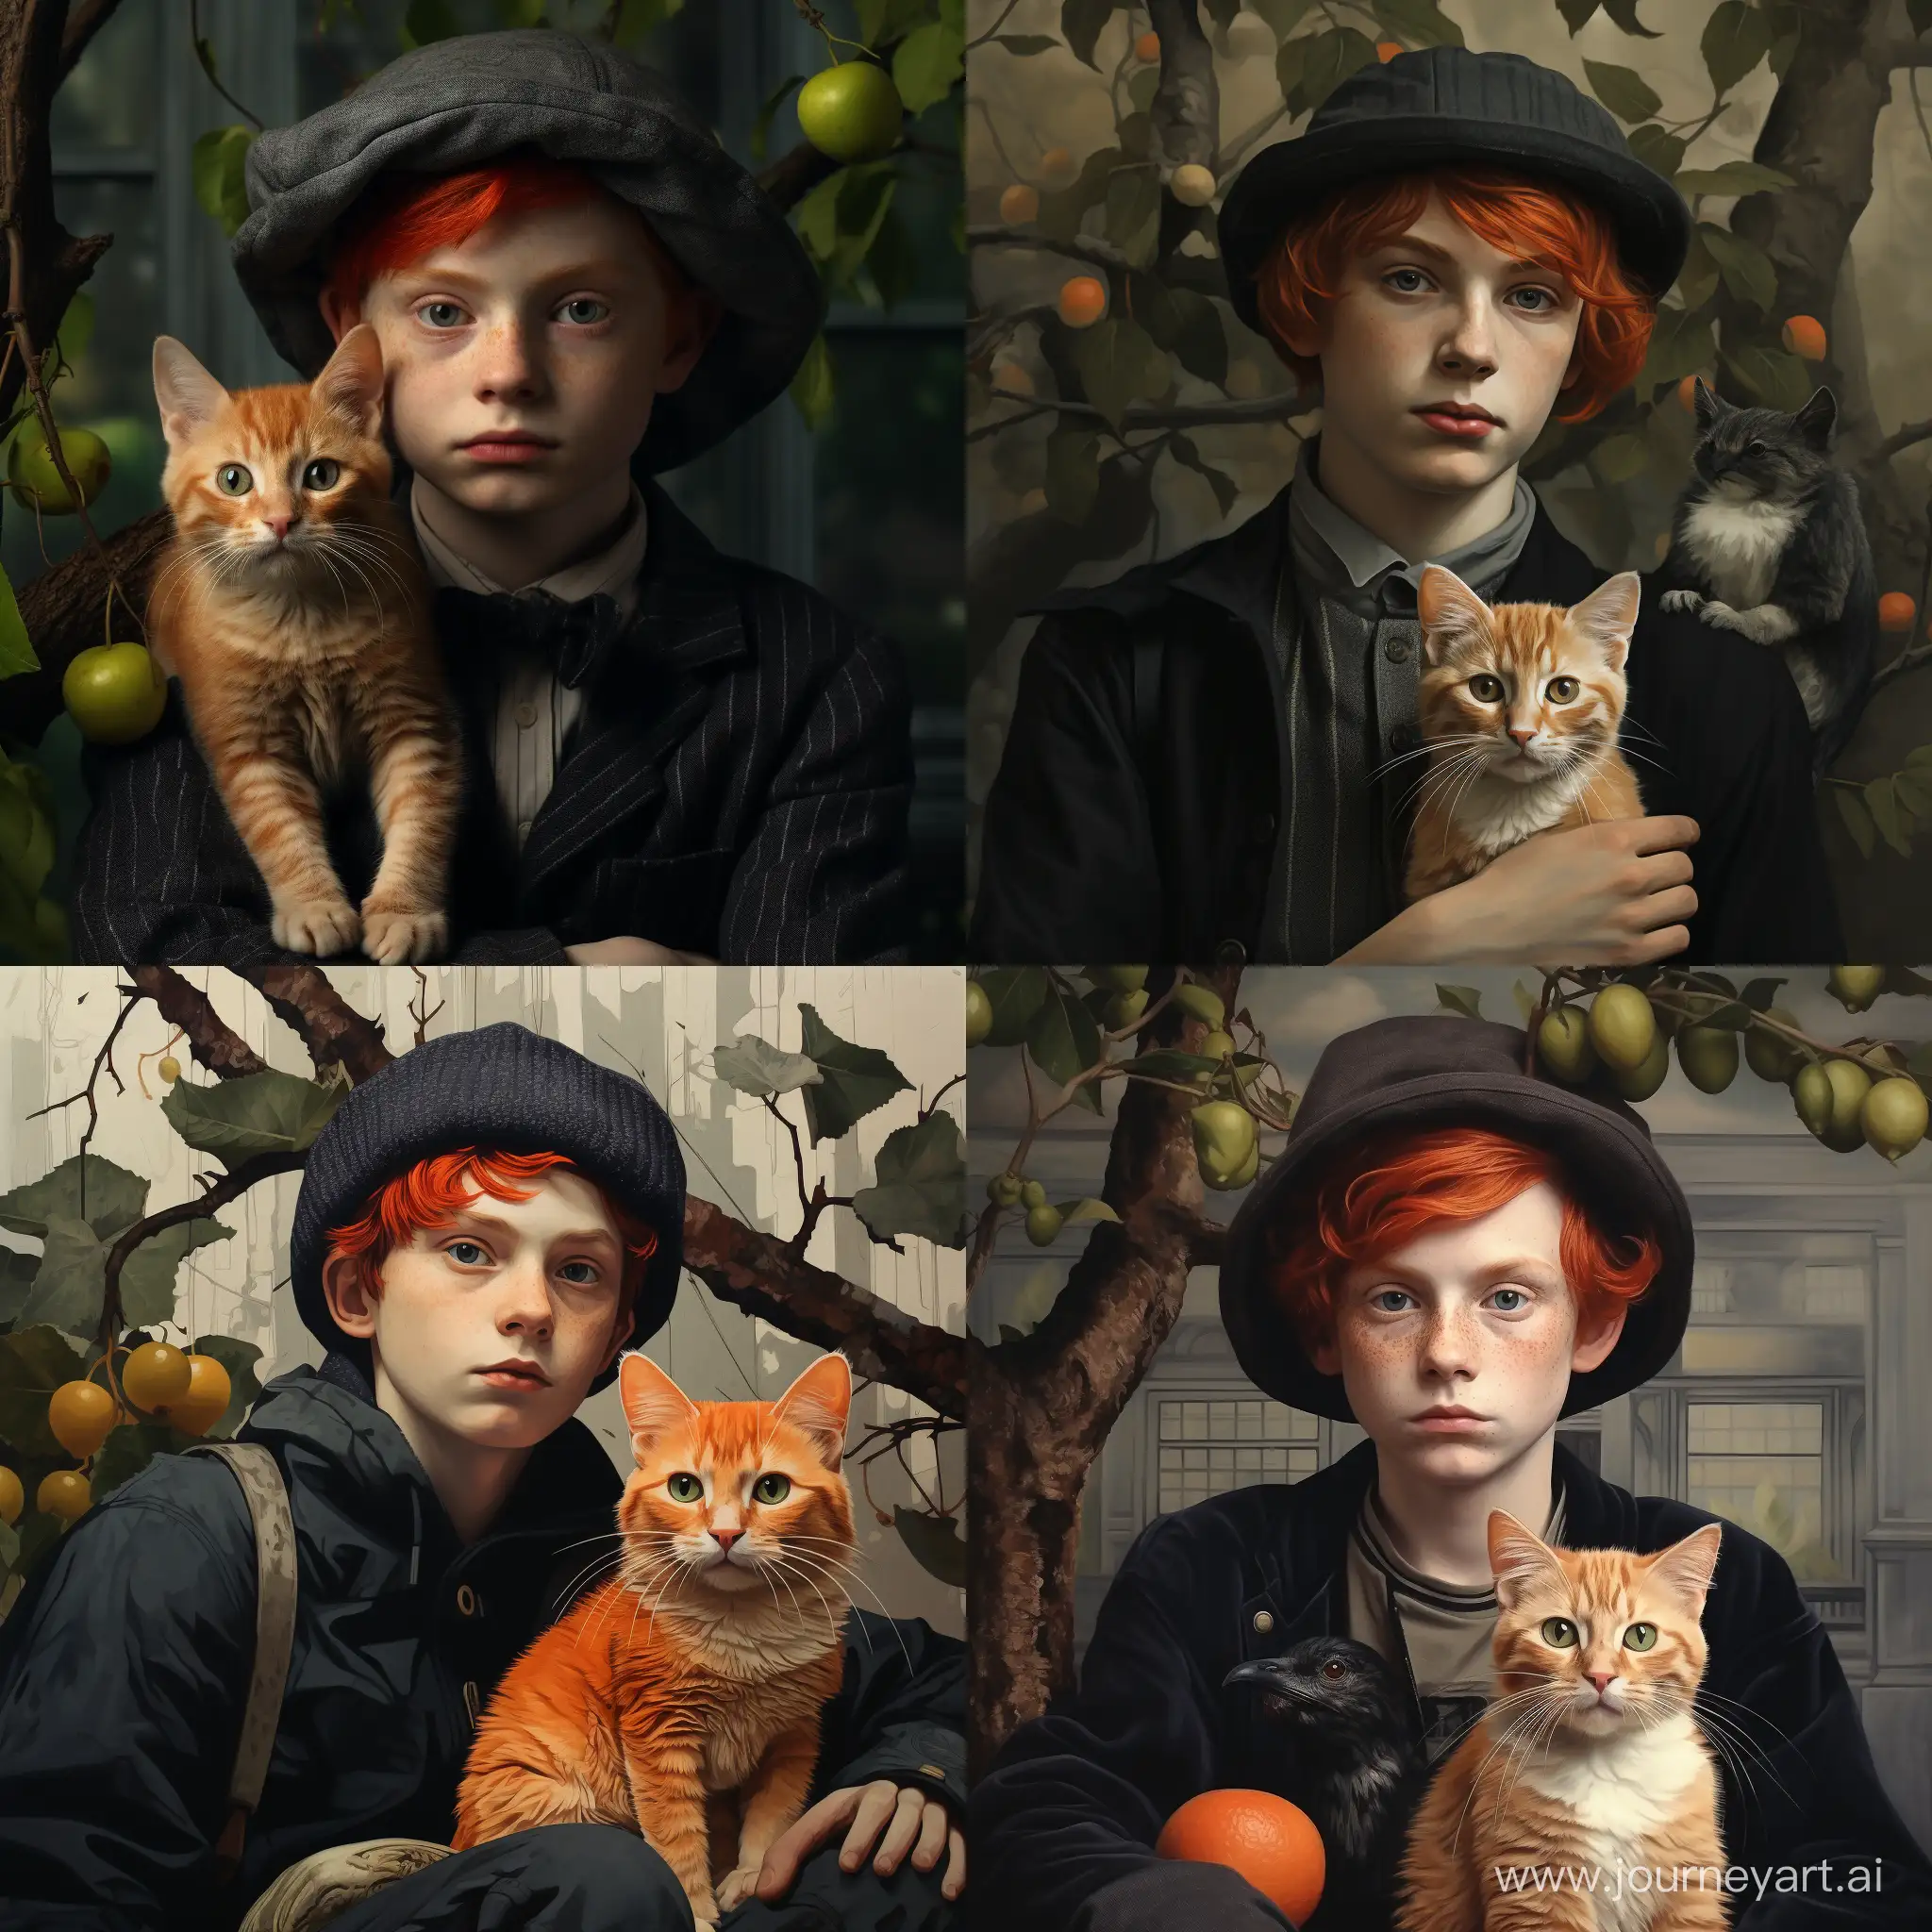 Adorable-RedHaired-Boy-with-Freckles-Holding-a-Ginger-Cat-and-Sponge-on-Urban-Street